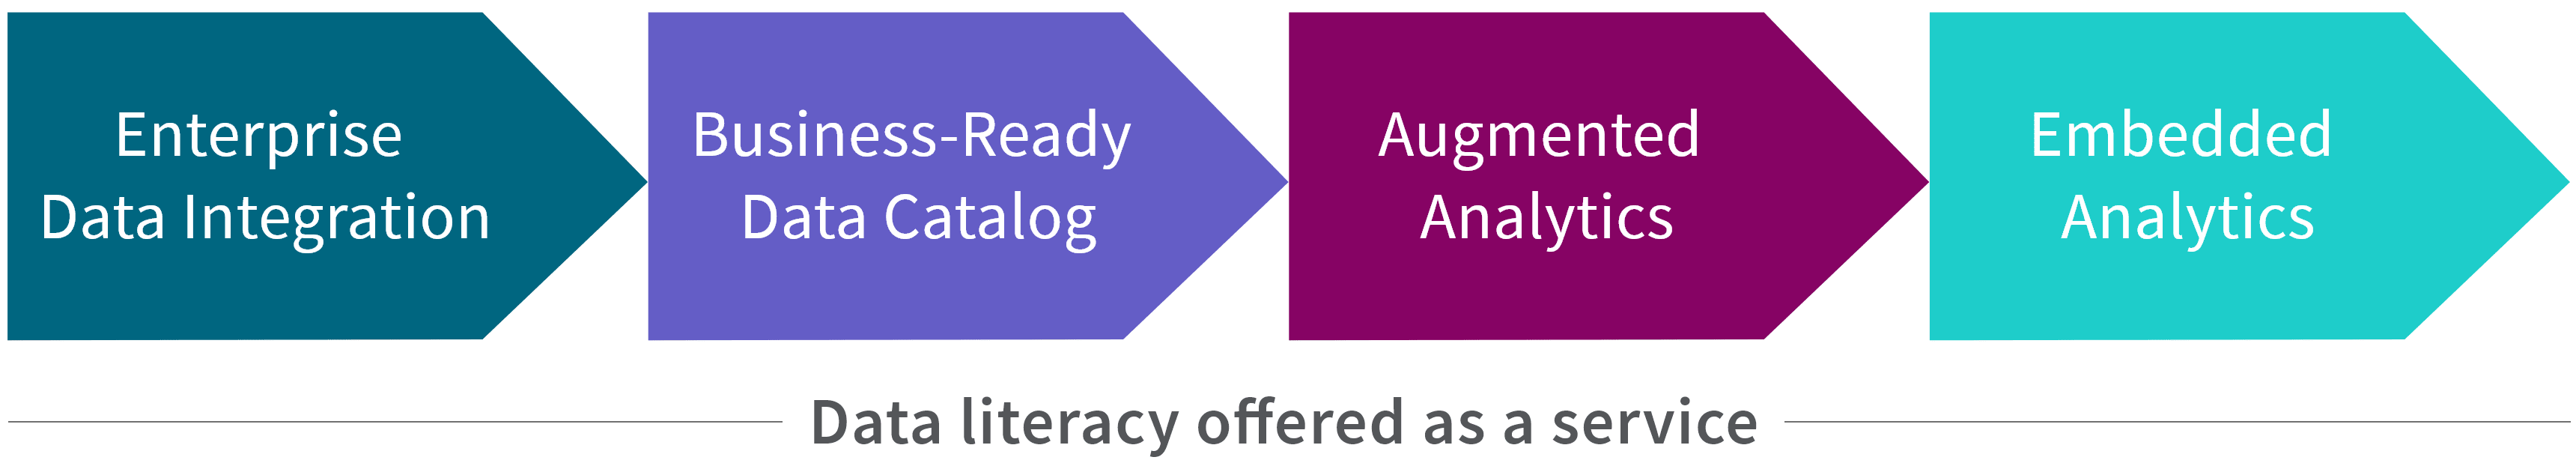 Diagram showing the offerings of data literacy offered as a service